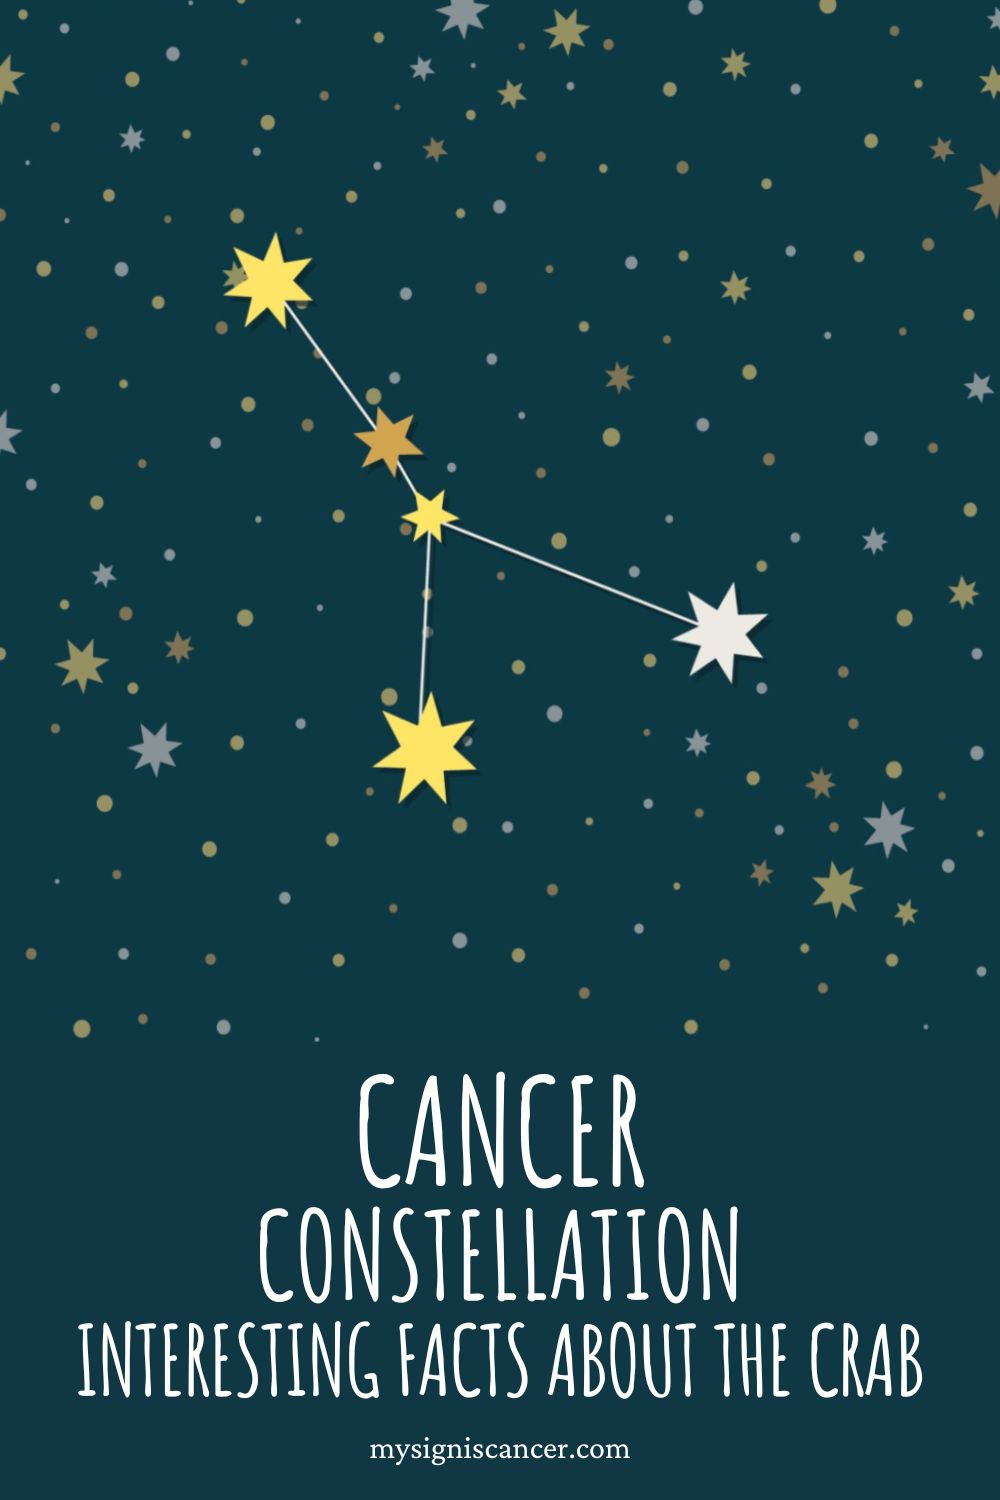 Cancer Constellation – Learn Facts About The Crab (1)